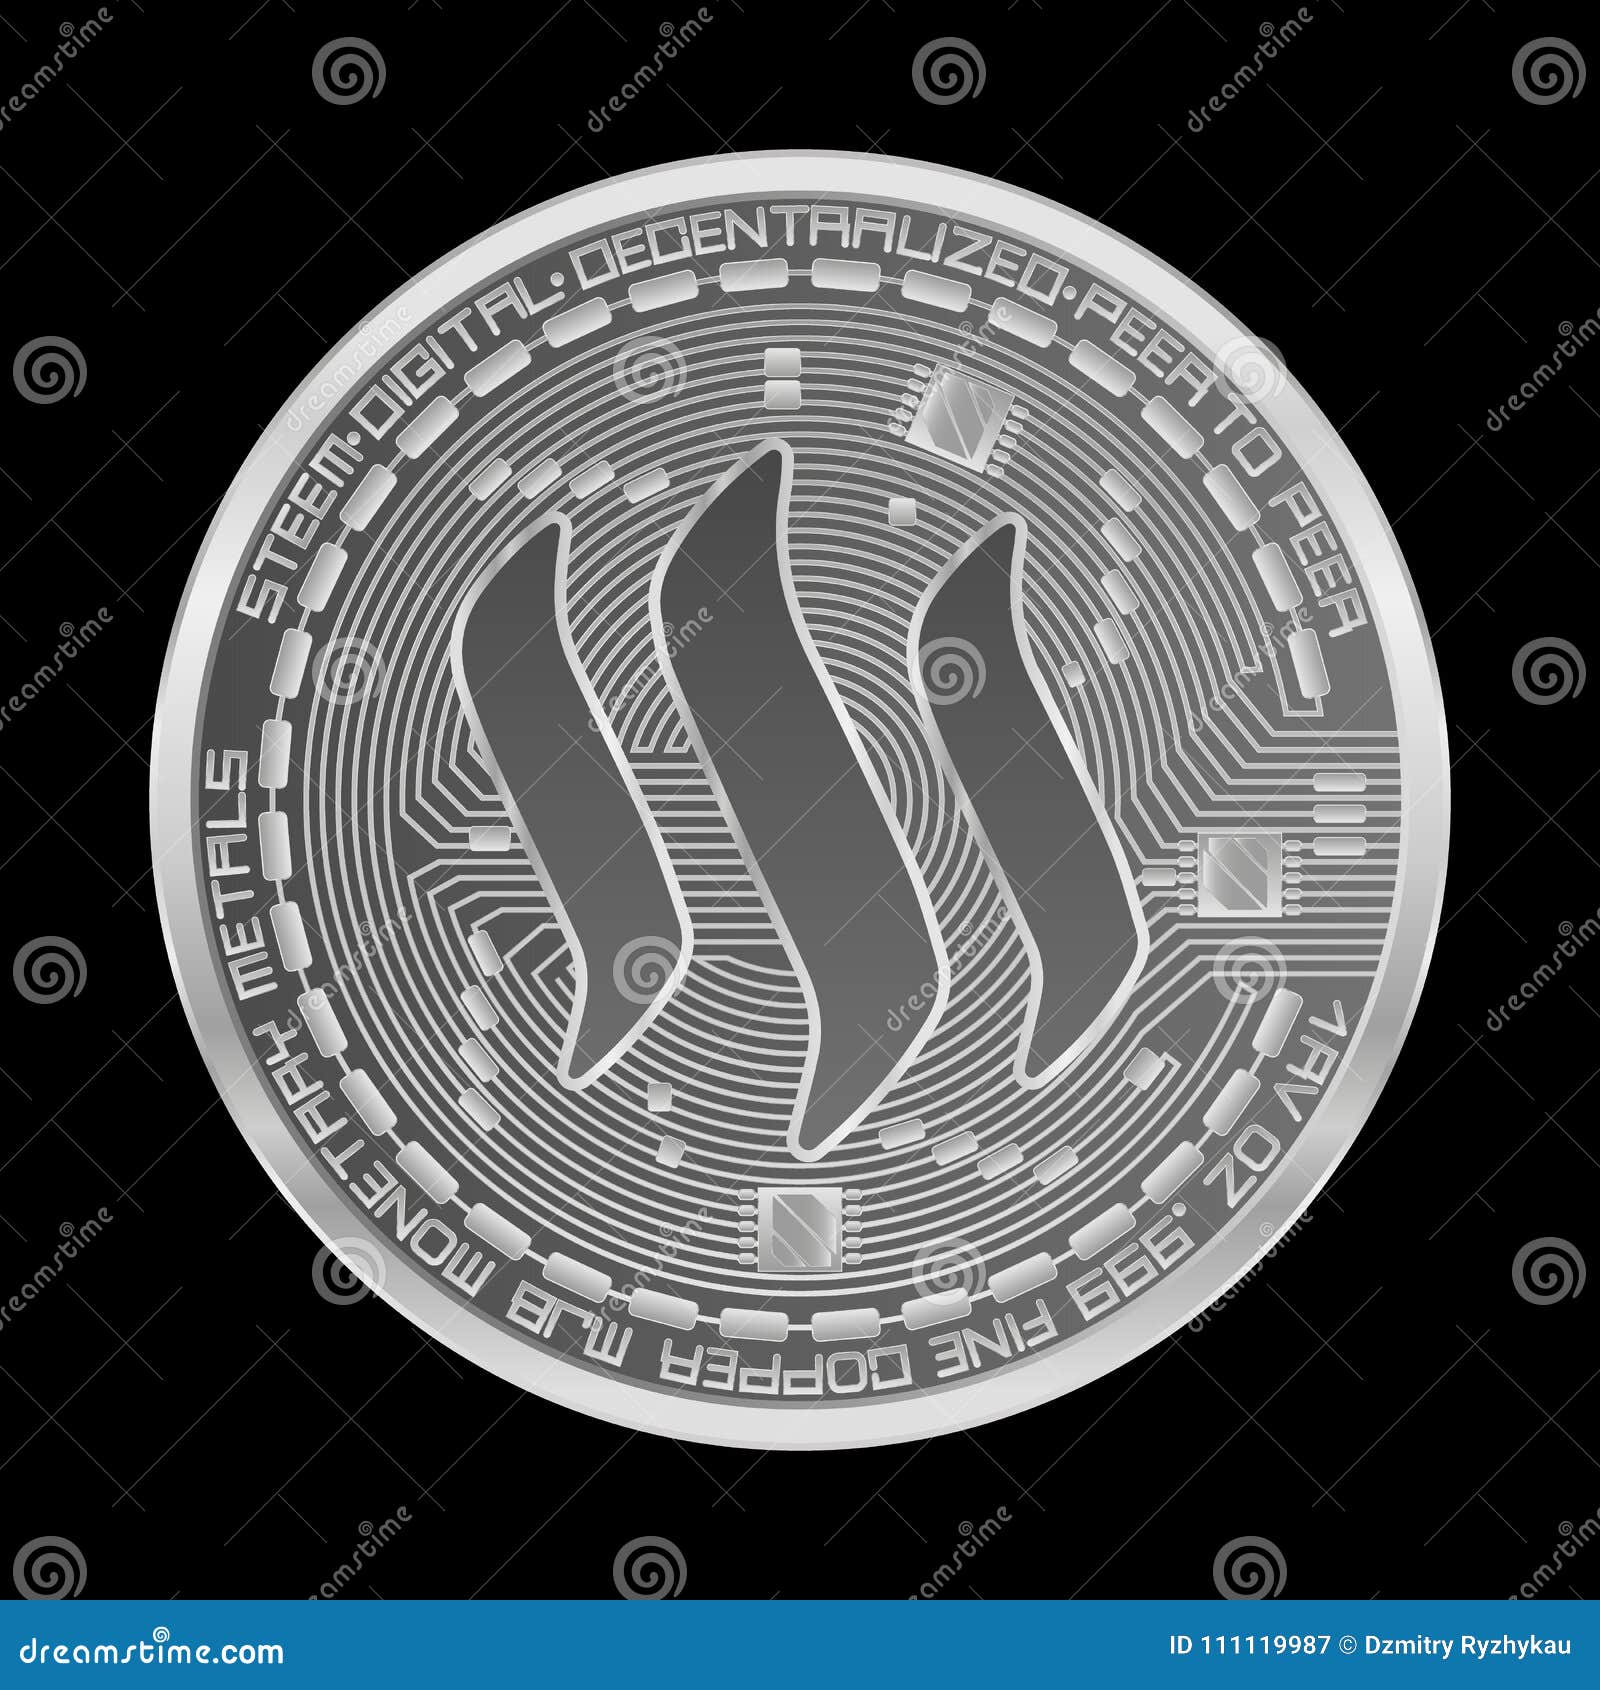 Crypto Currency Steem Silver Symbol Stock Illustration ...